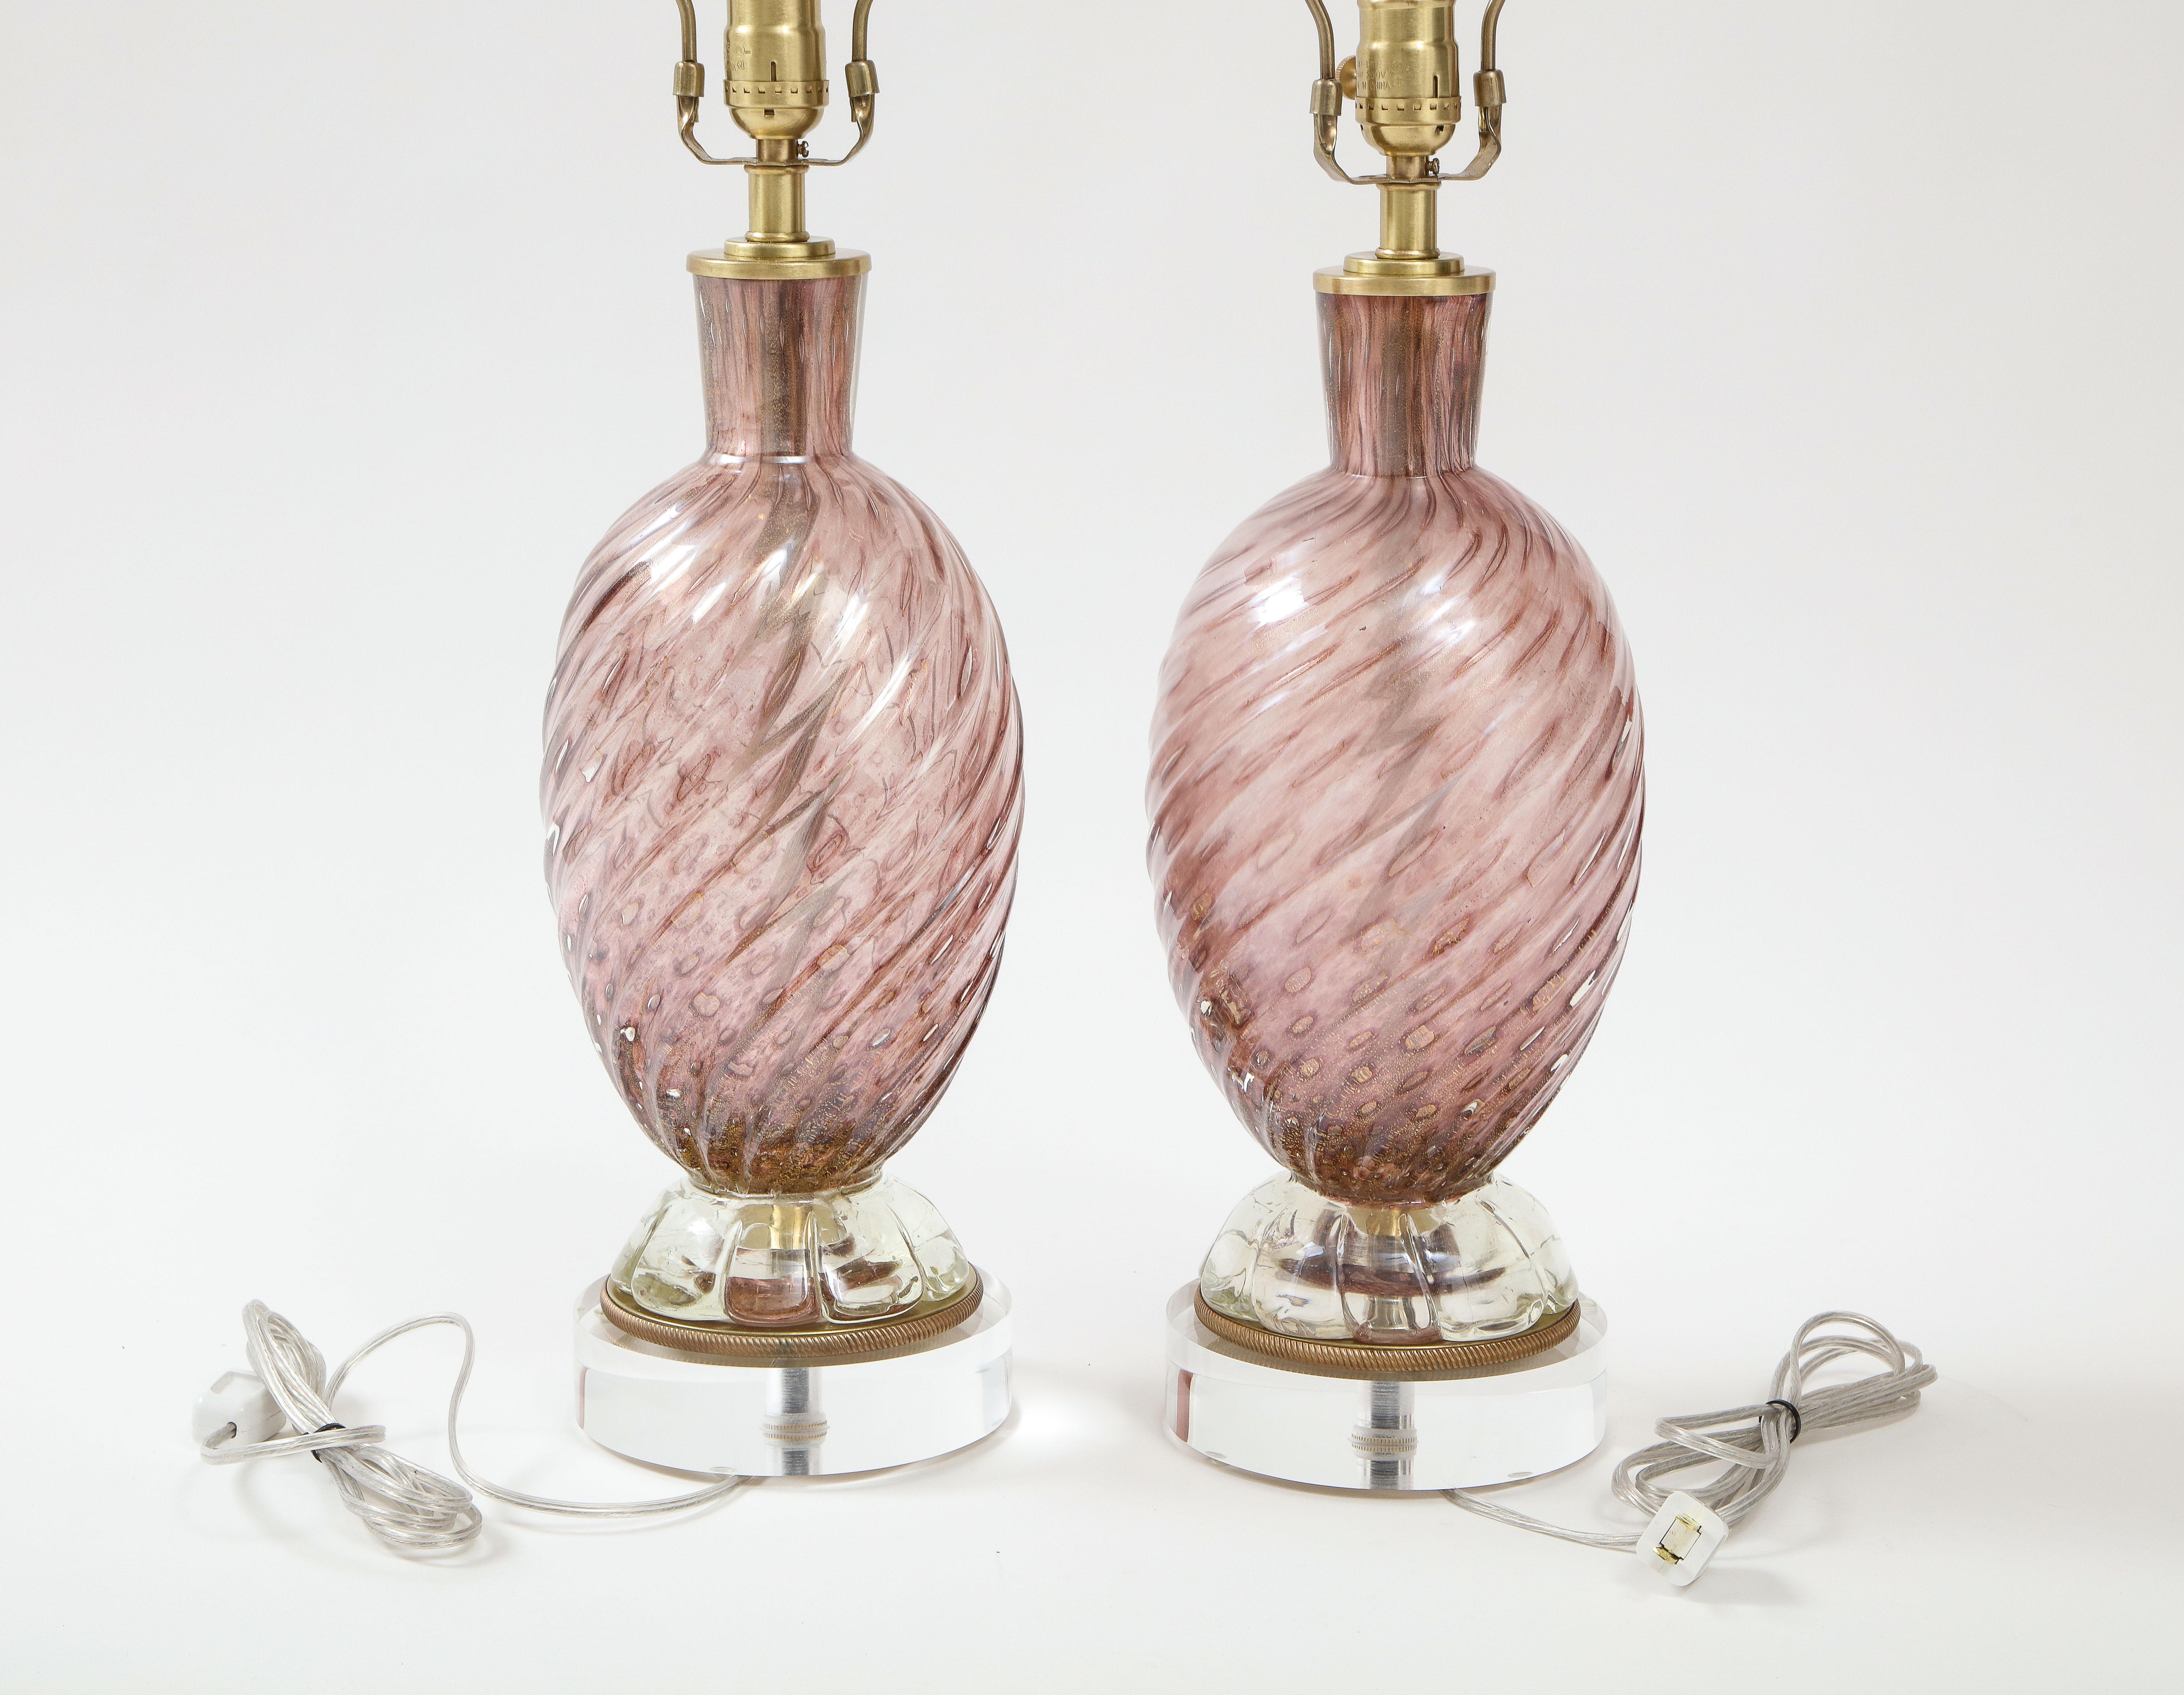 20th Century Barovier Smoked Amethyst Murano Lamps For Sale